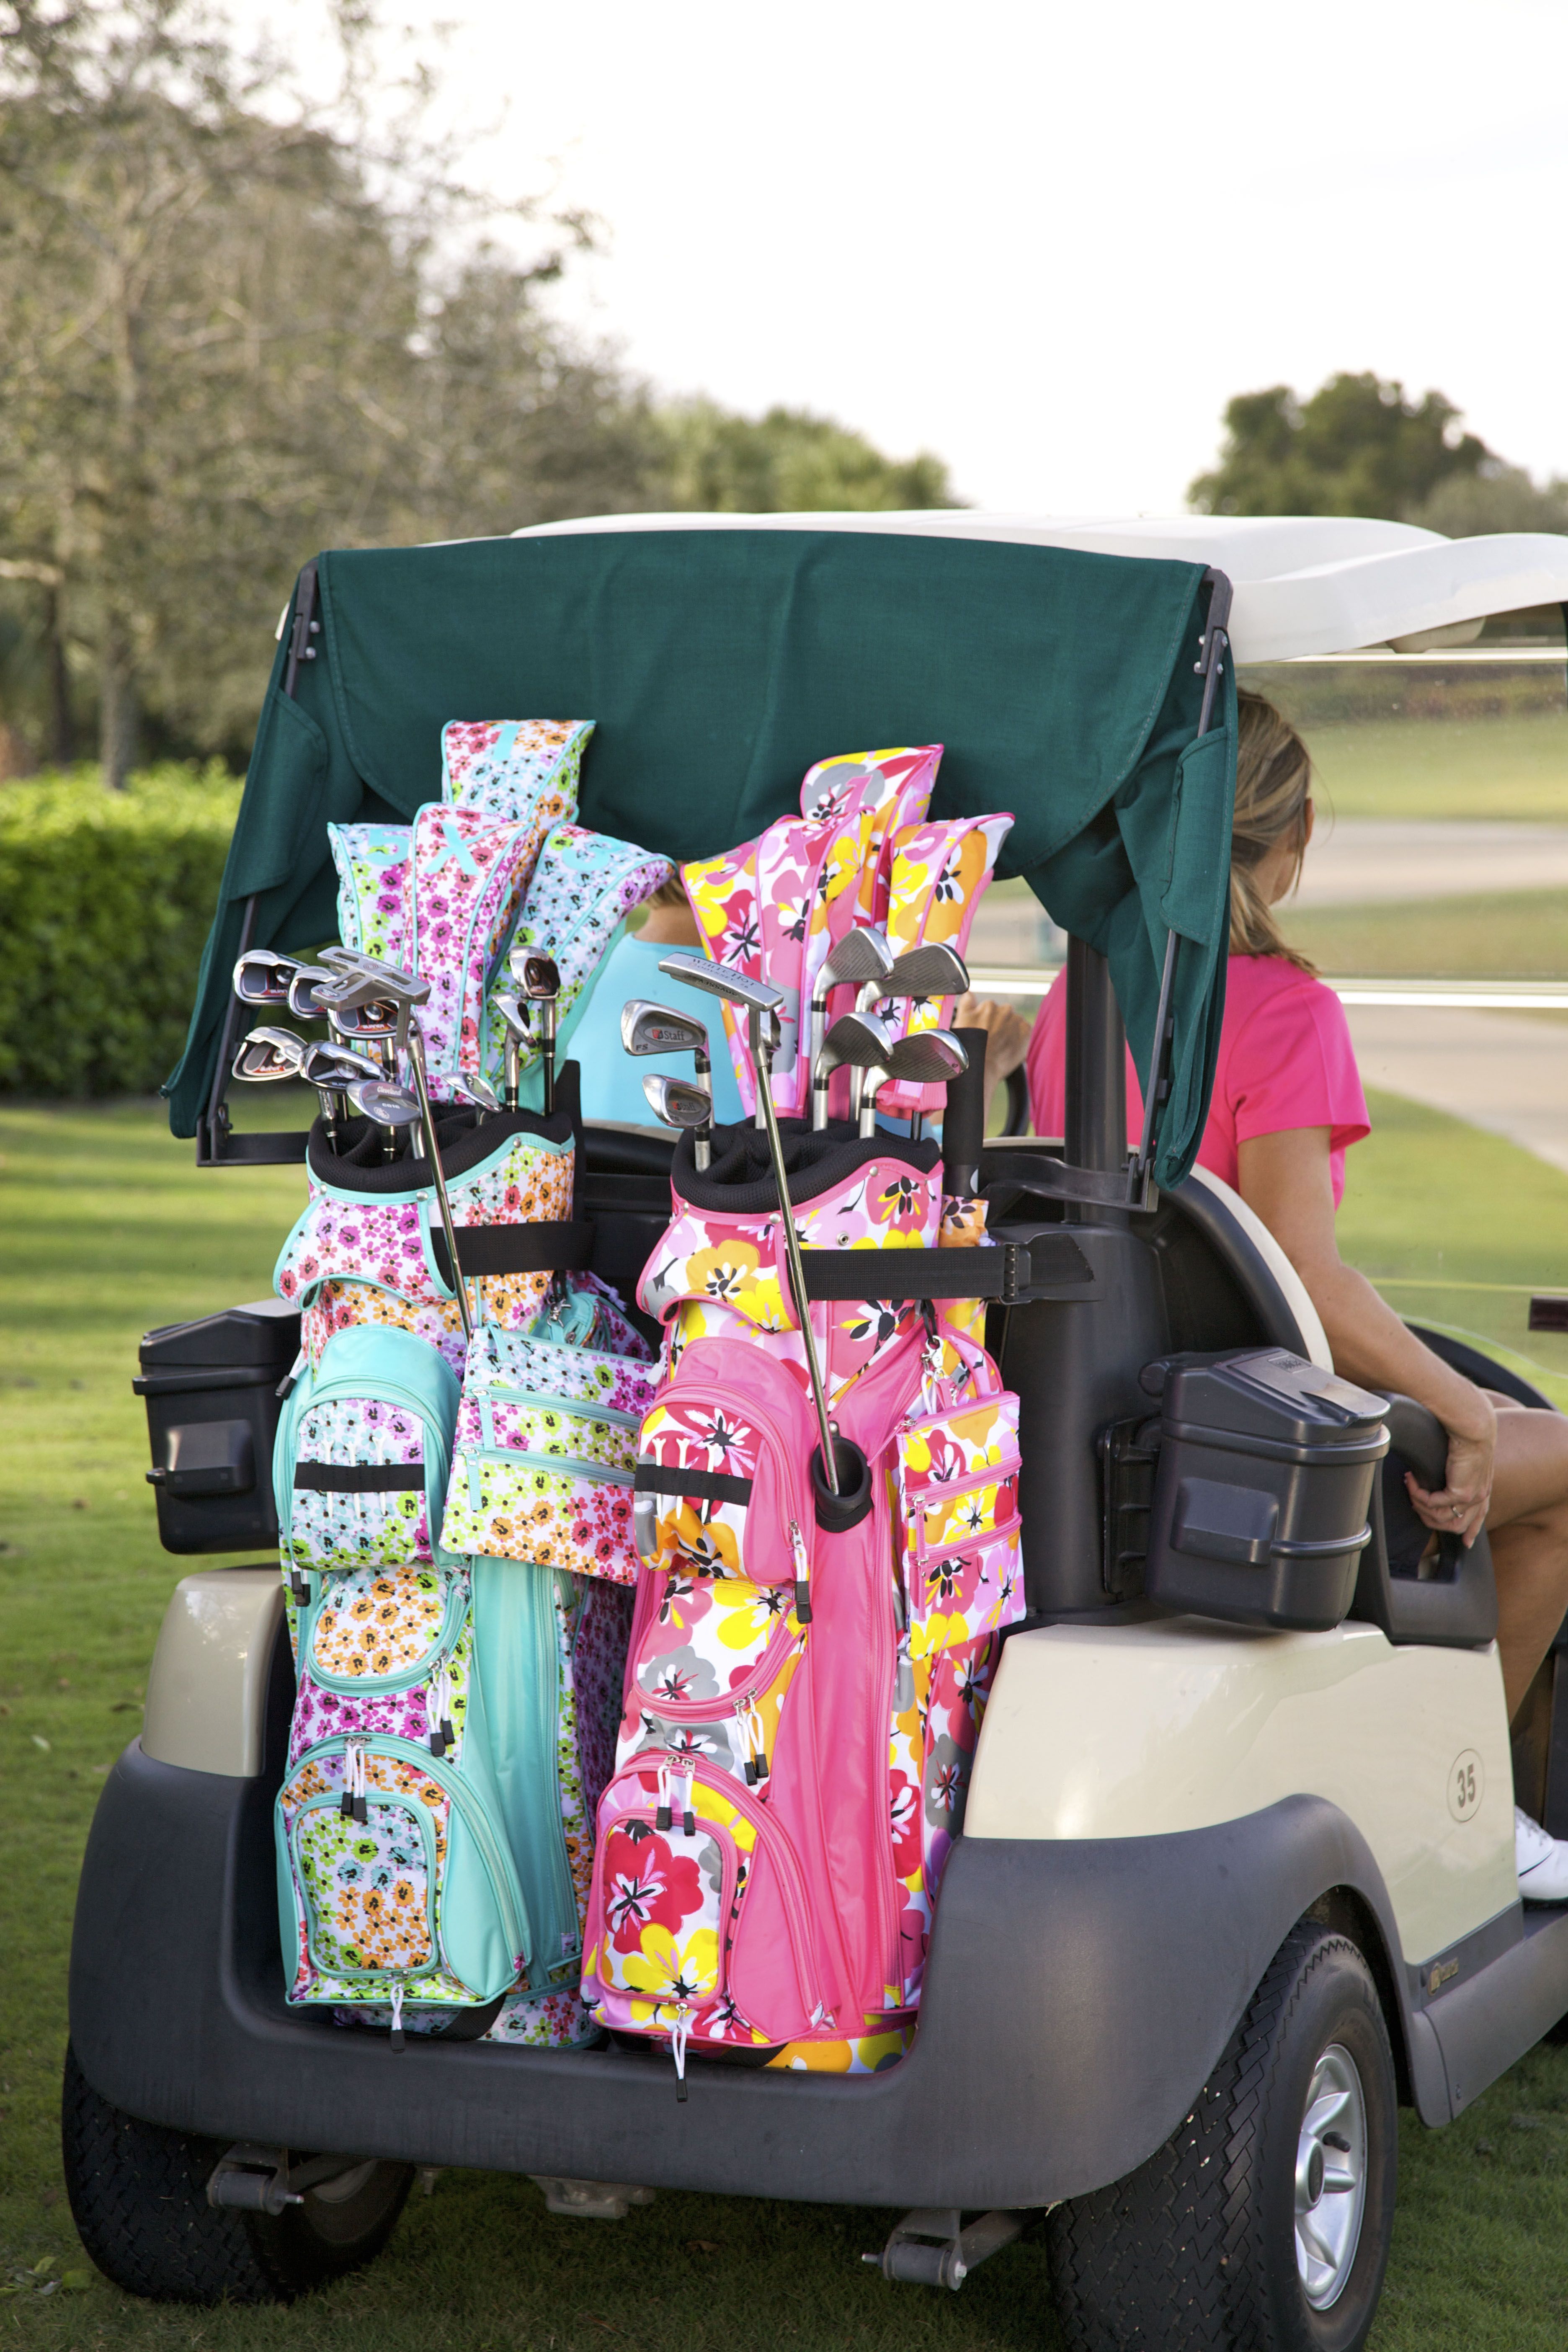 Hit the greens in style with our new Golf Club Covers. Set includes 4 head covers in assorted sizes perfect for protecting your